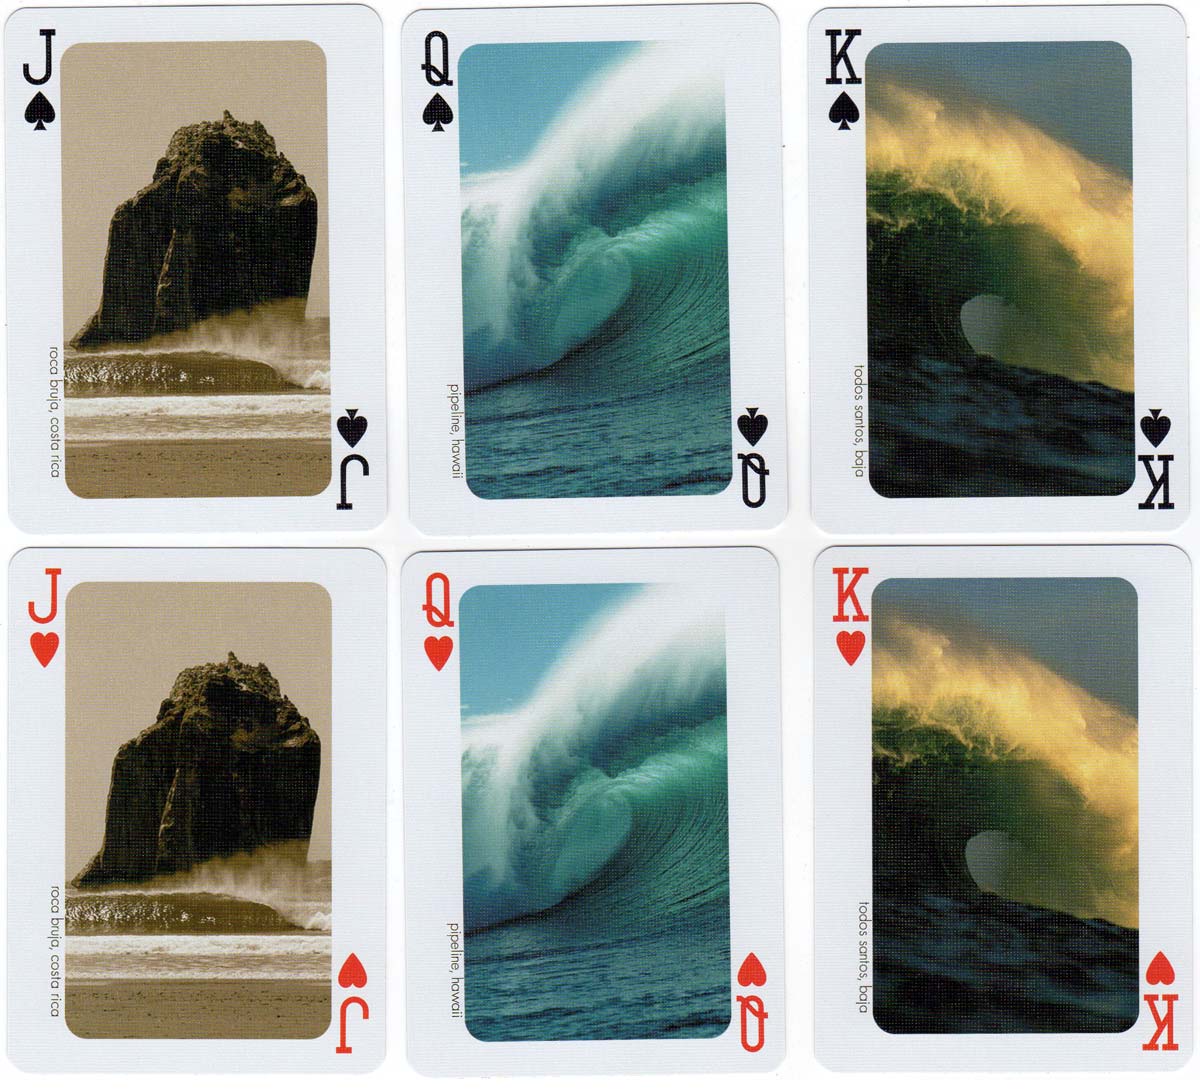 Waves From Around the World playing cards with photography by Aaron Chang